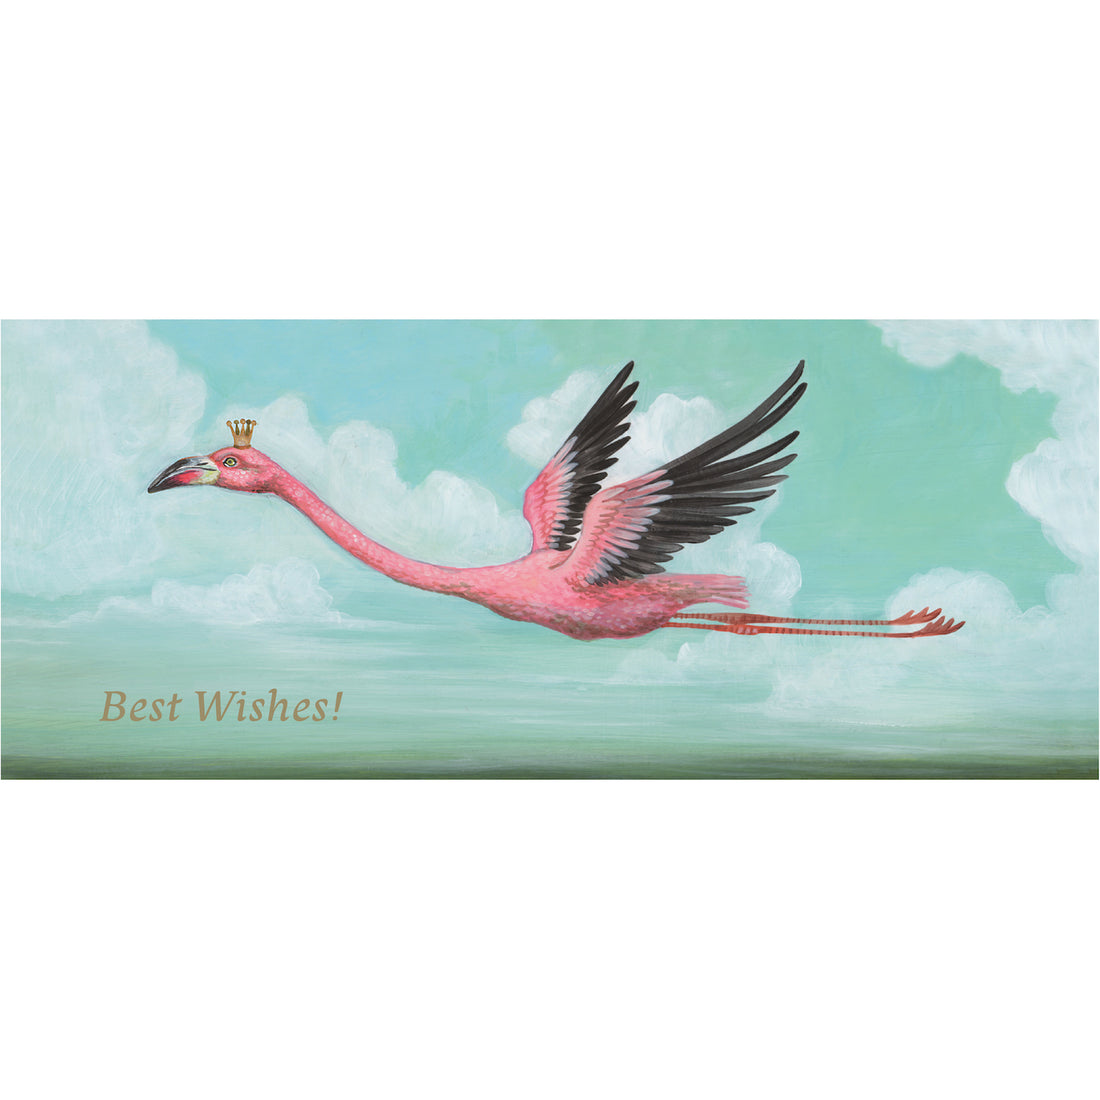 A whimsical illustration of a pink and black flamingo, wearing a gold crown on its head, flying through a cloudy teal sky with &quot;Best Wishes!&quot; printed in gold in the lower left of the card.